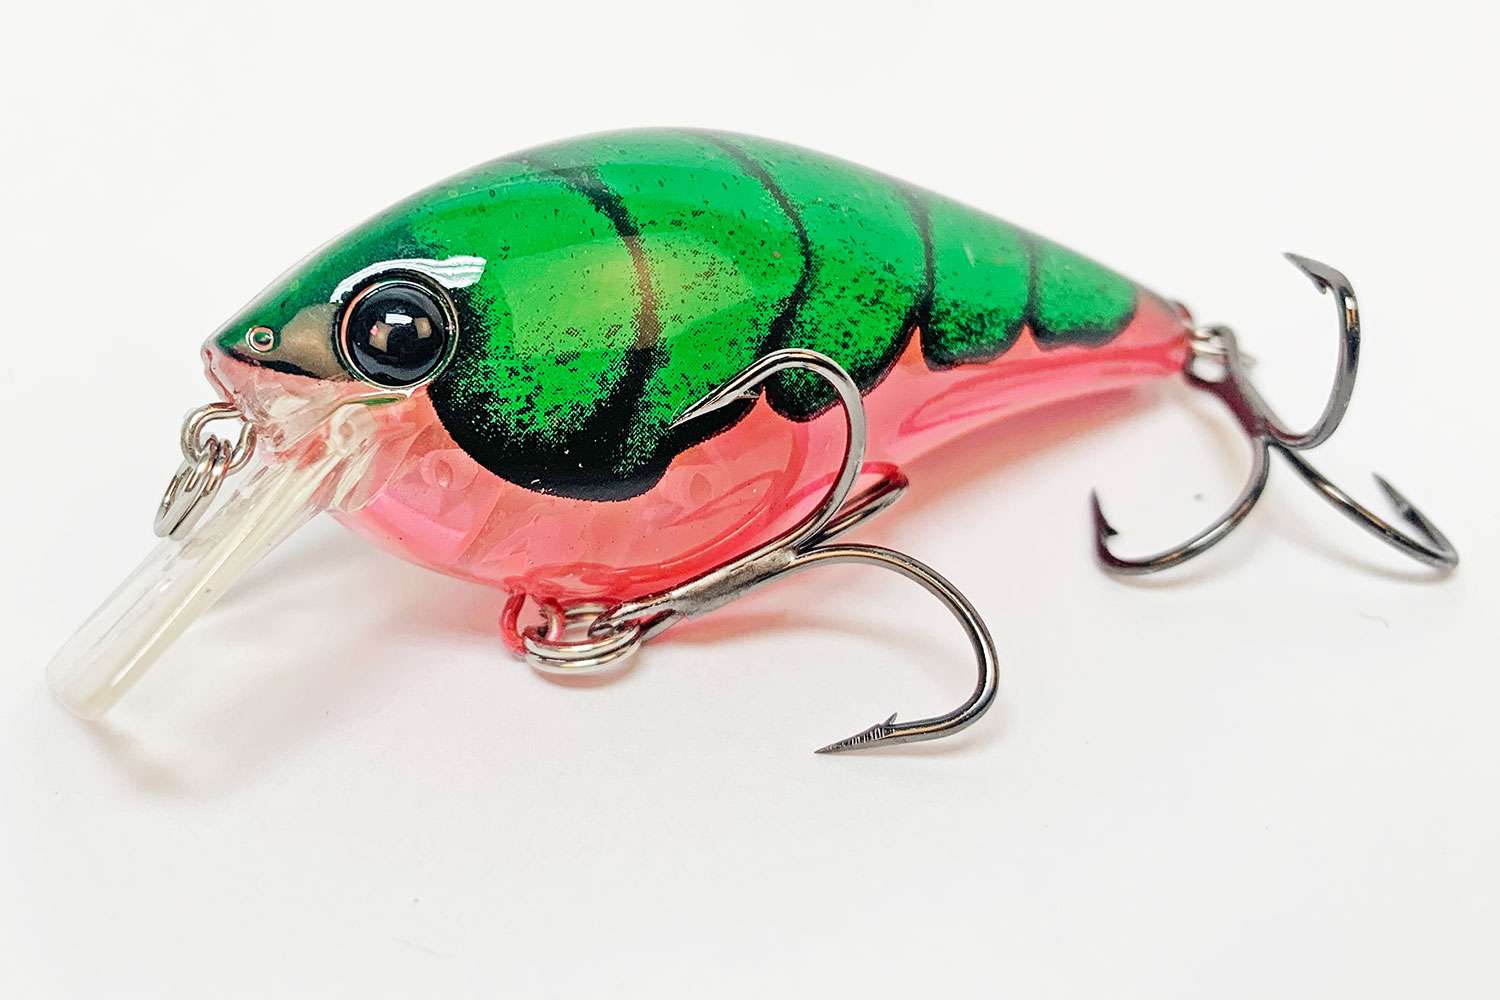 <p><b>Bubonic Bugz Squarebill</b></p>
At the intersection of art and fishing is a lure designer named Chris Grout. He began hand-painting lures as a hobby in 2011 under the name Bubonic. His unique style has since come to define the underground lure-painting scene. Catch Co. partnered with Grout to develop a process that combines revolutionary printing technology and airbrush painting to recreate his most iconic patters for the masses.<br>
<p><b>MSRP: $11.99</b></p>
<a href=